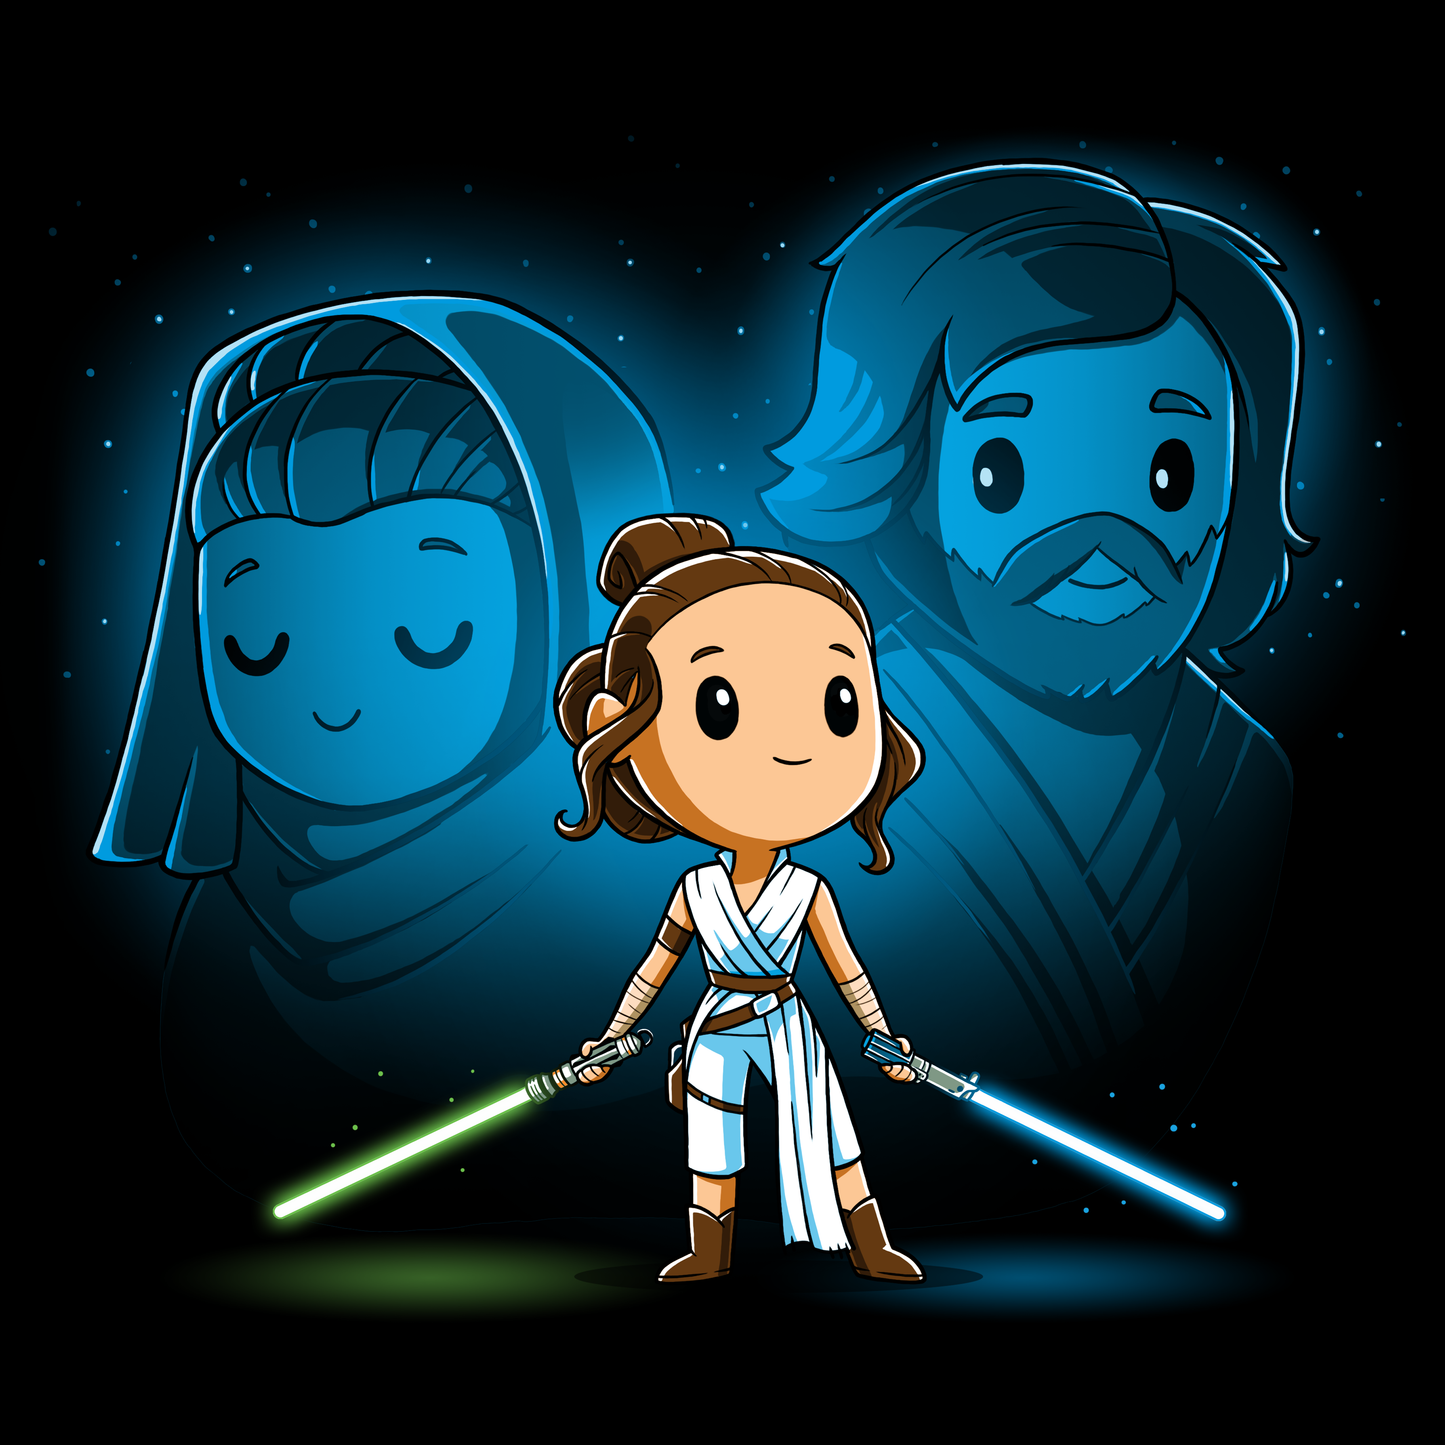 Officially licensed Star Wars Rey, Luke, and Leia T-shirt.